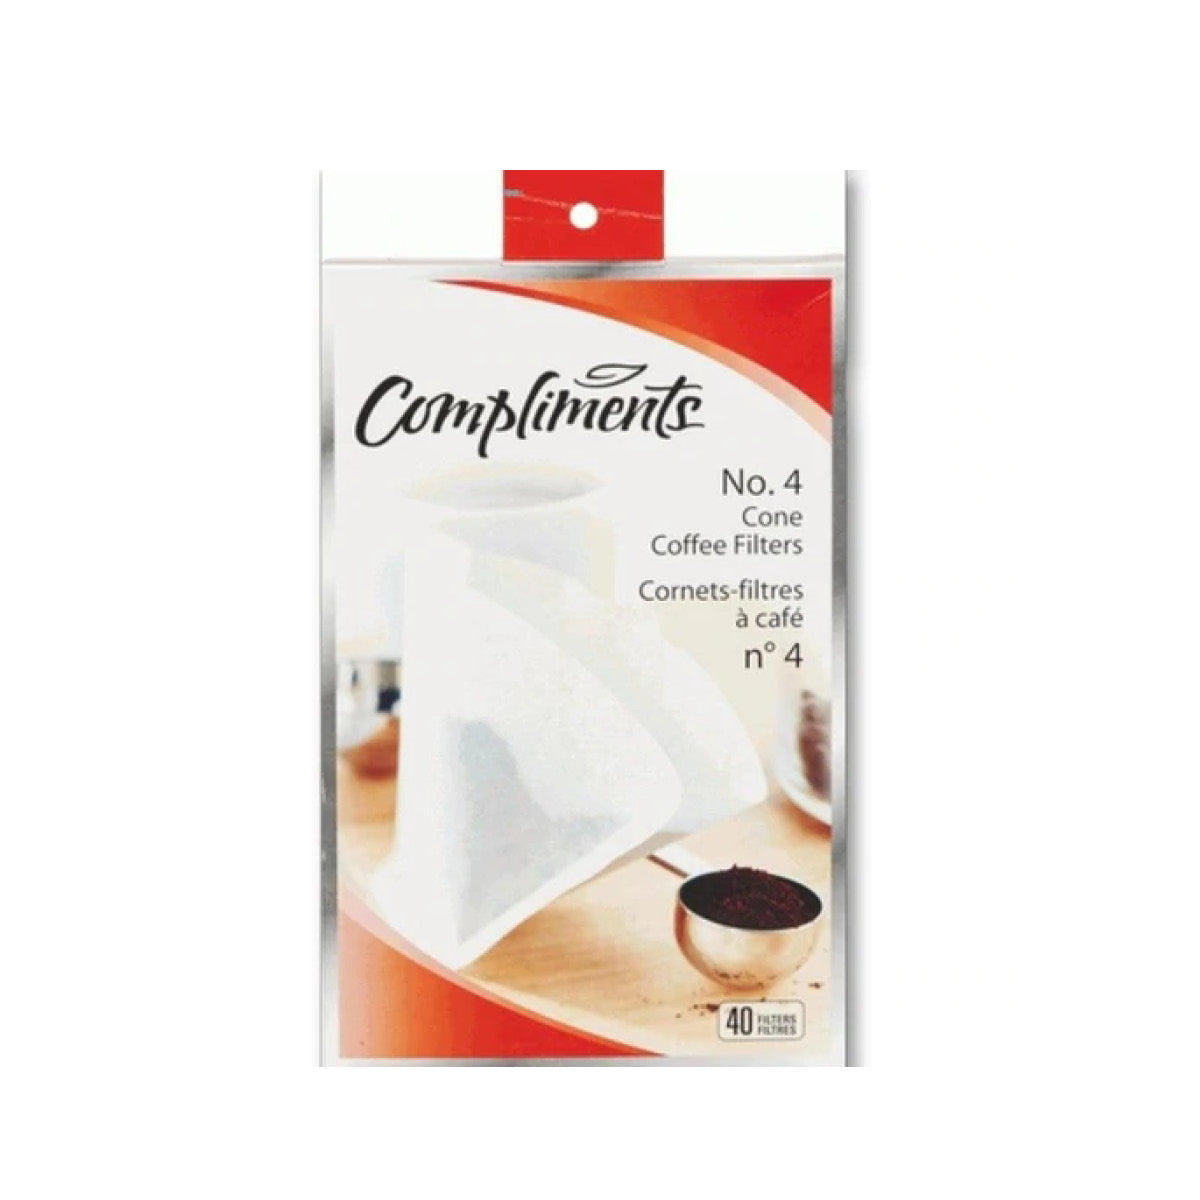 Compliments Coffee Filters Cone 4, 40pk